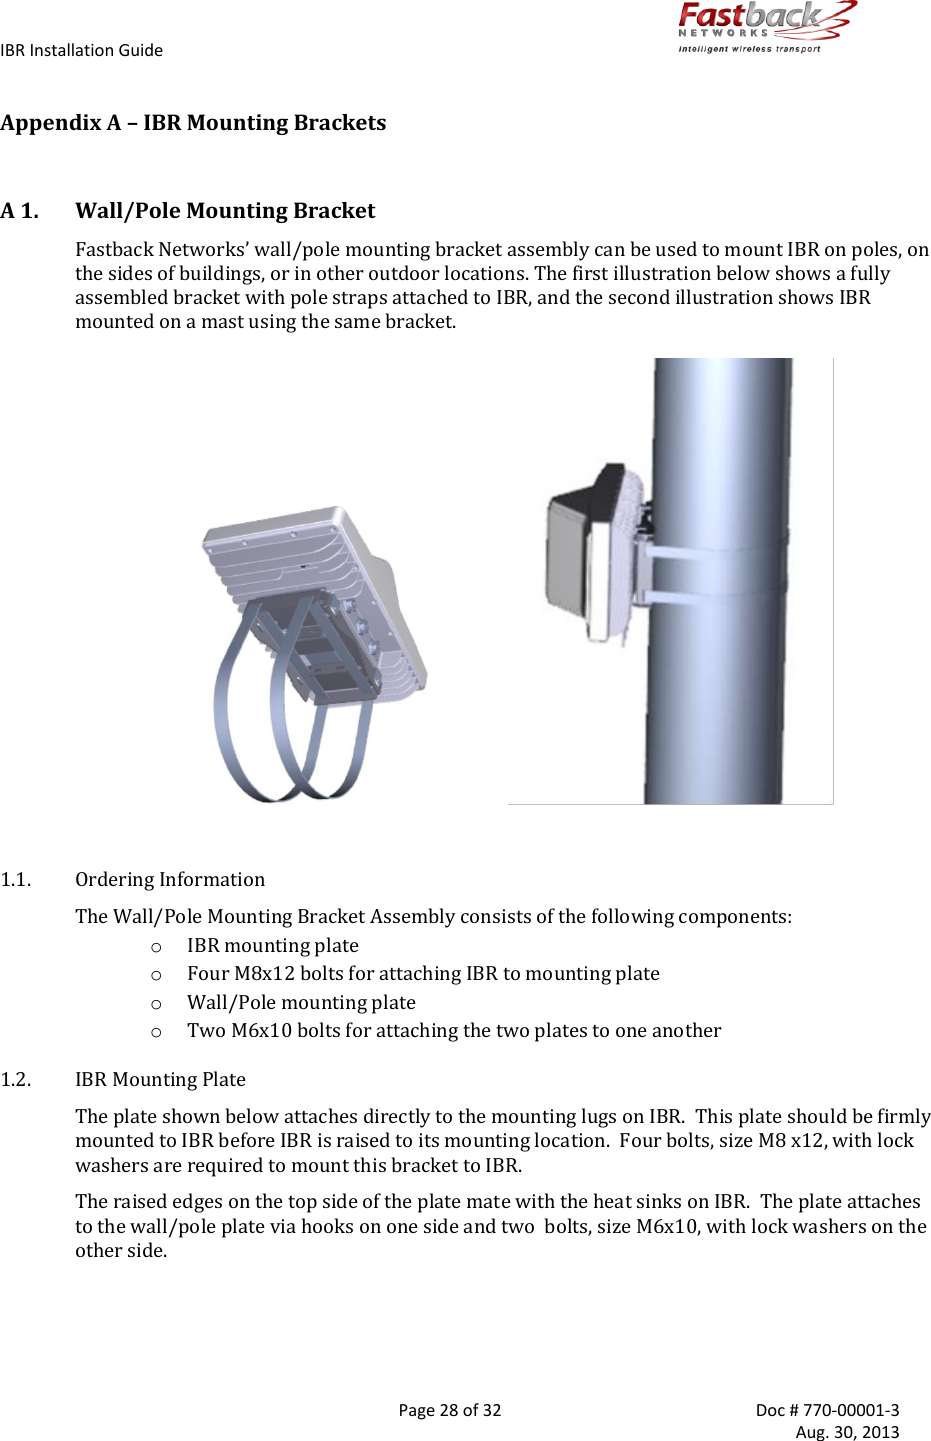 IBR Installation Guide        Page 28 of 32  Doc # 770-00001-3     Aug. 30, 2013   Appendix A – IBR Mounting Brackets  A 1. Wall/Pole Mounting Bracket Fastback Networks’ wall/pole mounting bracket assembly can be used to mount IBR on poles, on the sides of buildings, or in other outdoor locations. The first illustration below shows a fully assembled bracket with pole straps attached to IBR, and the second illustration shows IBR mounted on a mast using the same bracket.                                                1.1. Ordering Information The Wall/Pole Mounting Bracket Assembly consists of the following components: o IBR mounting plate  o Four M8x12 bolts for attaching IBR to mounting plate o Wall/Pole mounting plate o Two M6x10 bolts for attaching the two plates to one another 1.2. IBR Mounting Plate The plate shown below attaches directly to the mounting lugs on IBR.  This plate should be firmly mounted to IBR before IBR is raised to its mounting location.  Four bolts, size M8 x12, with lock washers are required to mount this bracket to IBR. The raised edges on the top side of the plate mate with the heat sinks on IBR.  The plate attaches to the wall/pole plate via hooks on one side and two  bolts, size M6x10, with lock washers on the other side.   